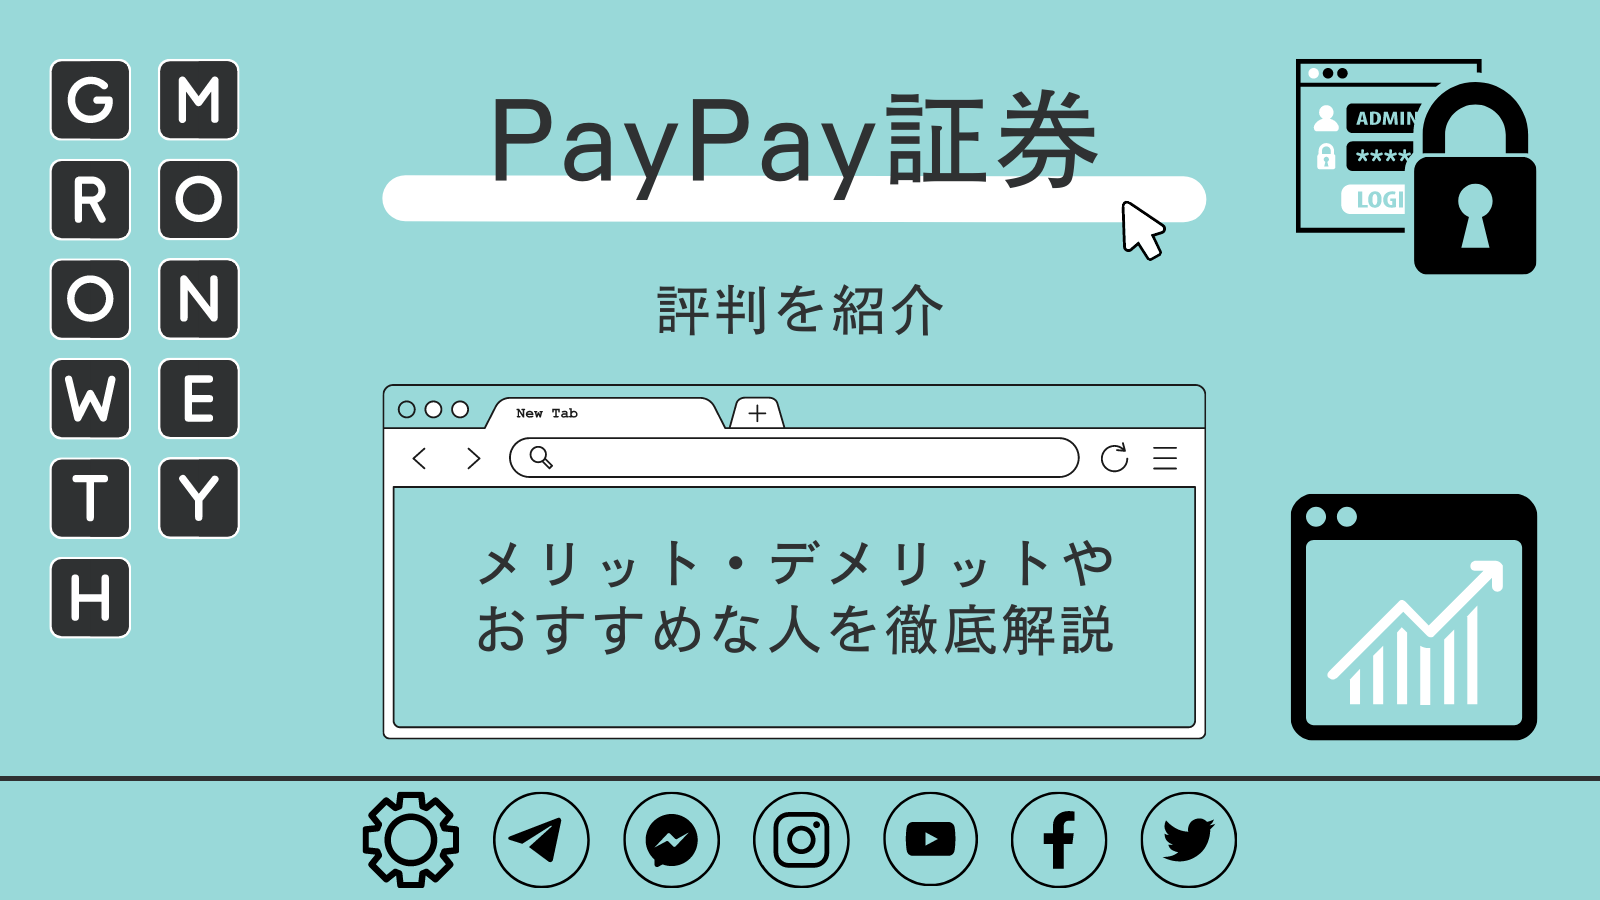 PayPay証券の評判を紹介